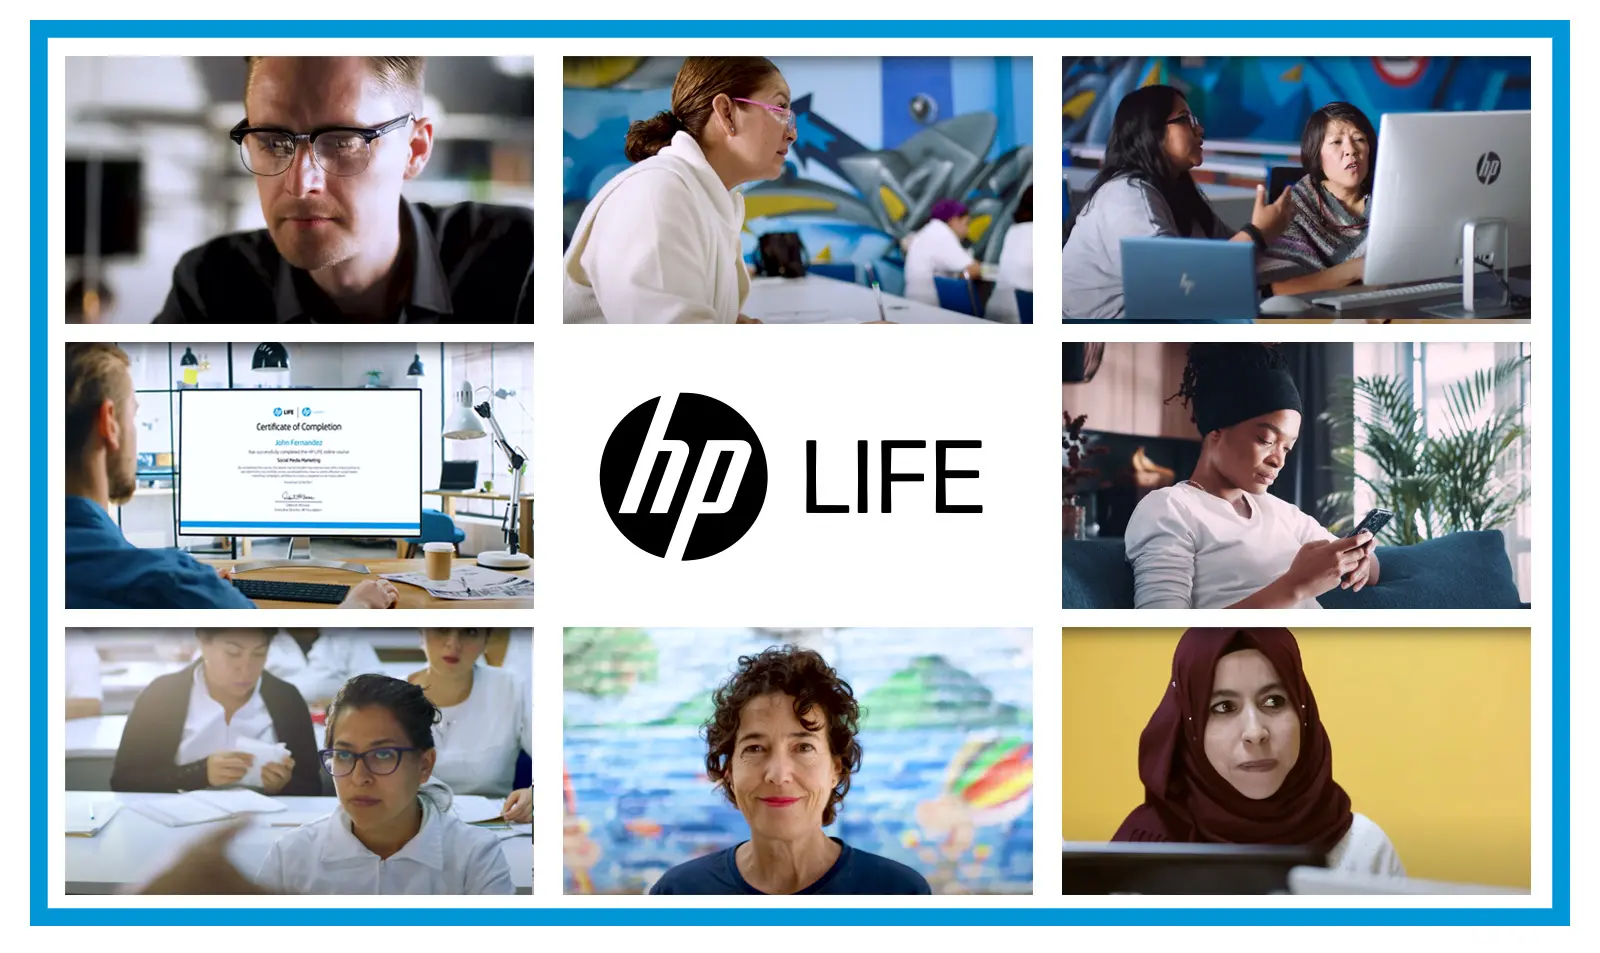 hewlett packard training courses - How much does HPE training cost